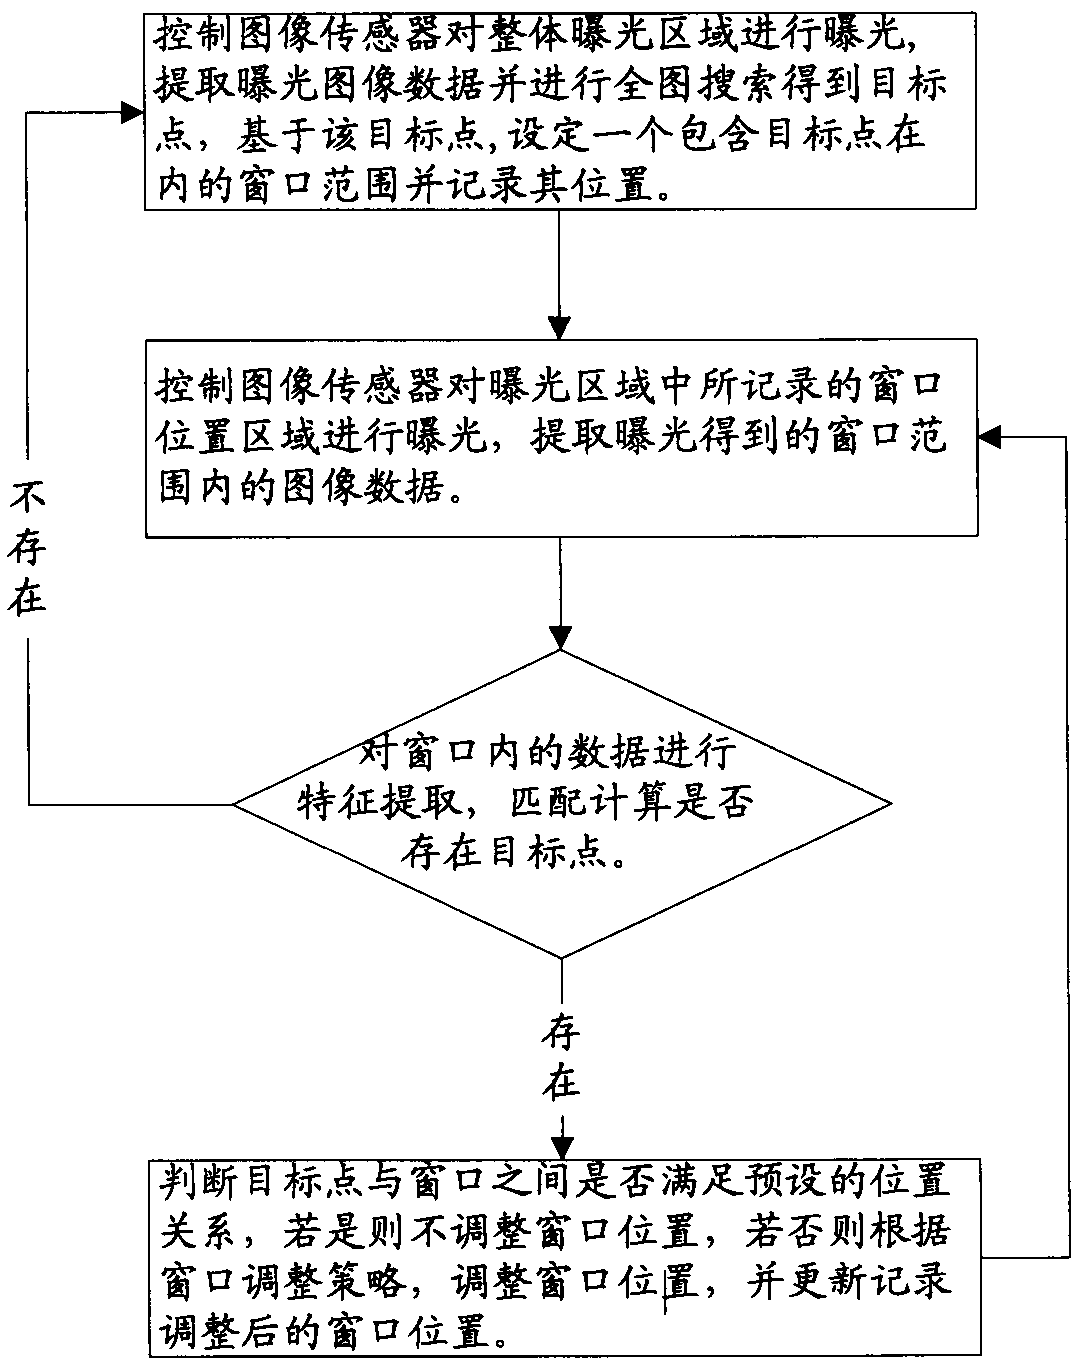 Method and system for obtaining image information